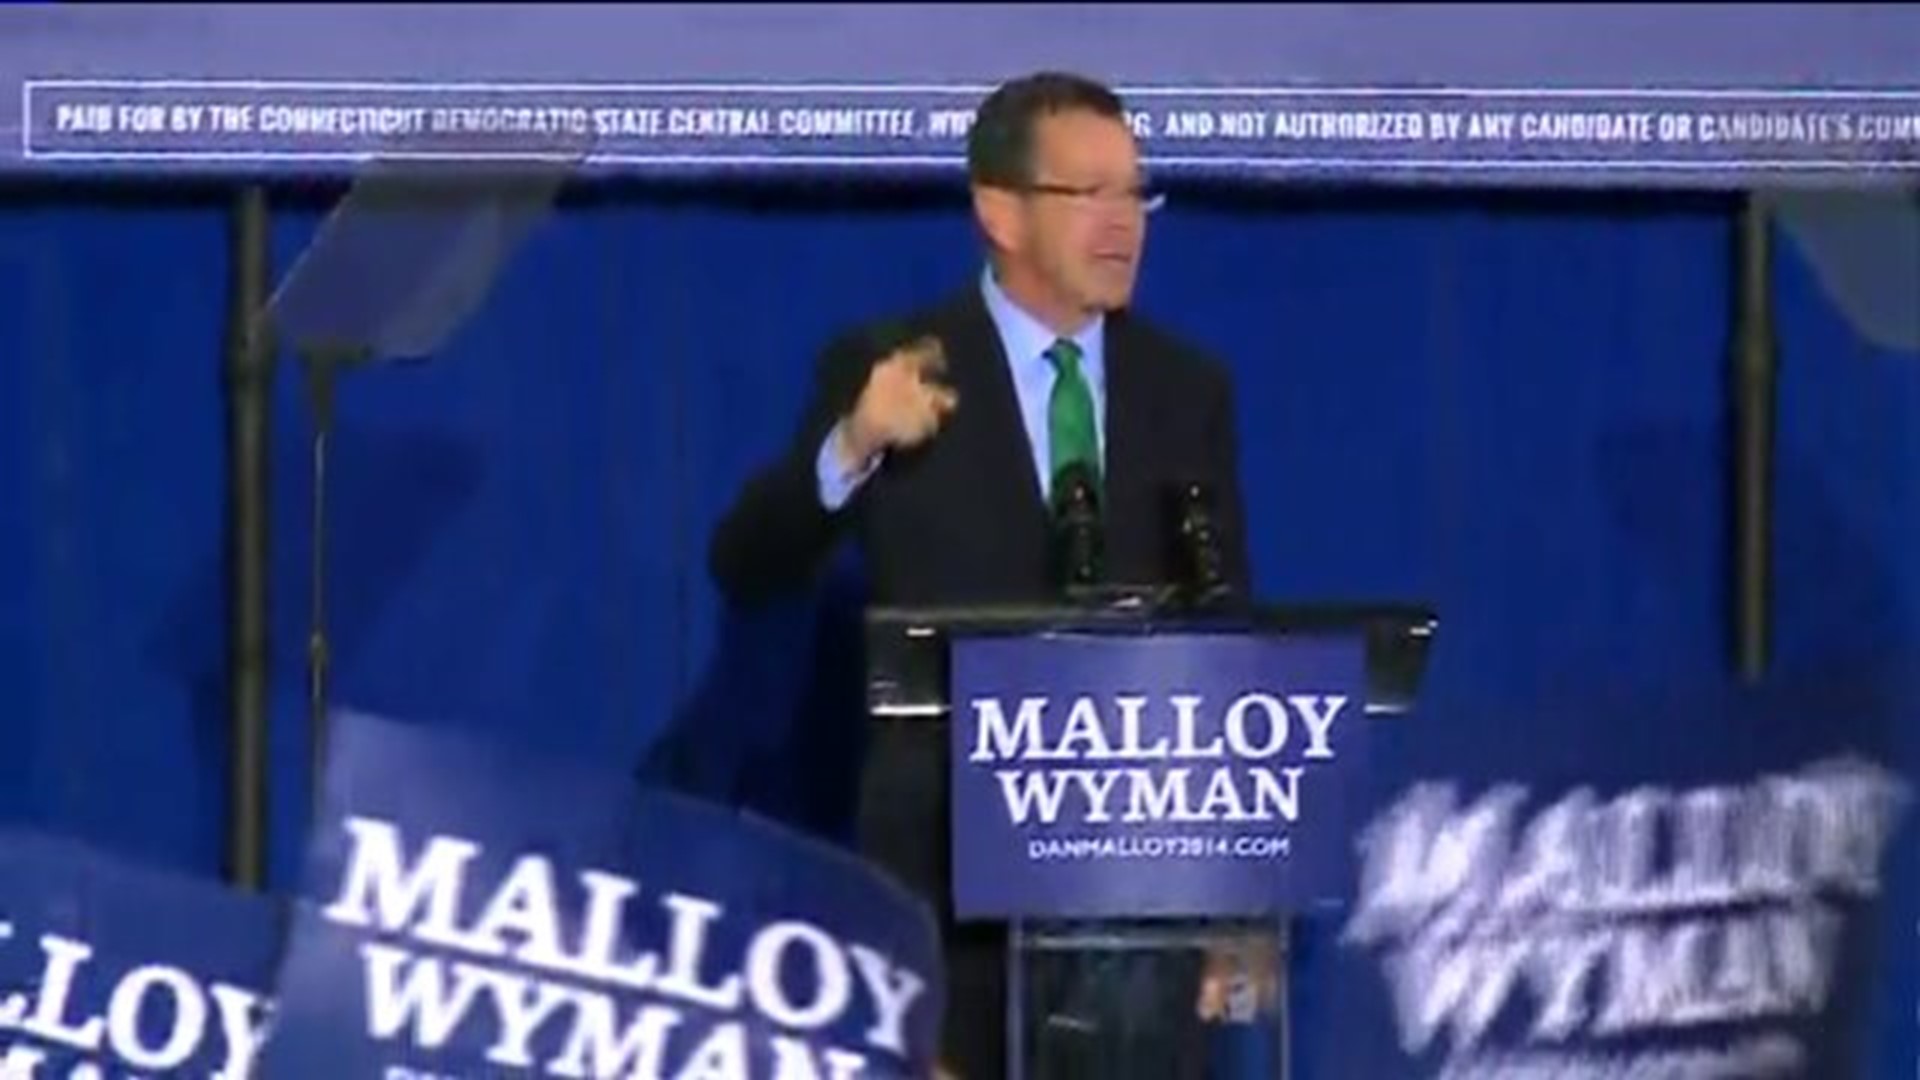 Gov. Malloy campaigns with friends just days before election